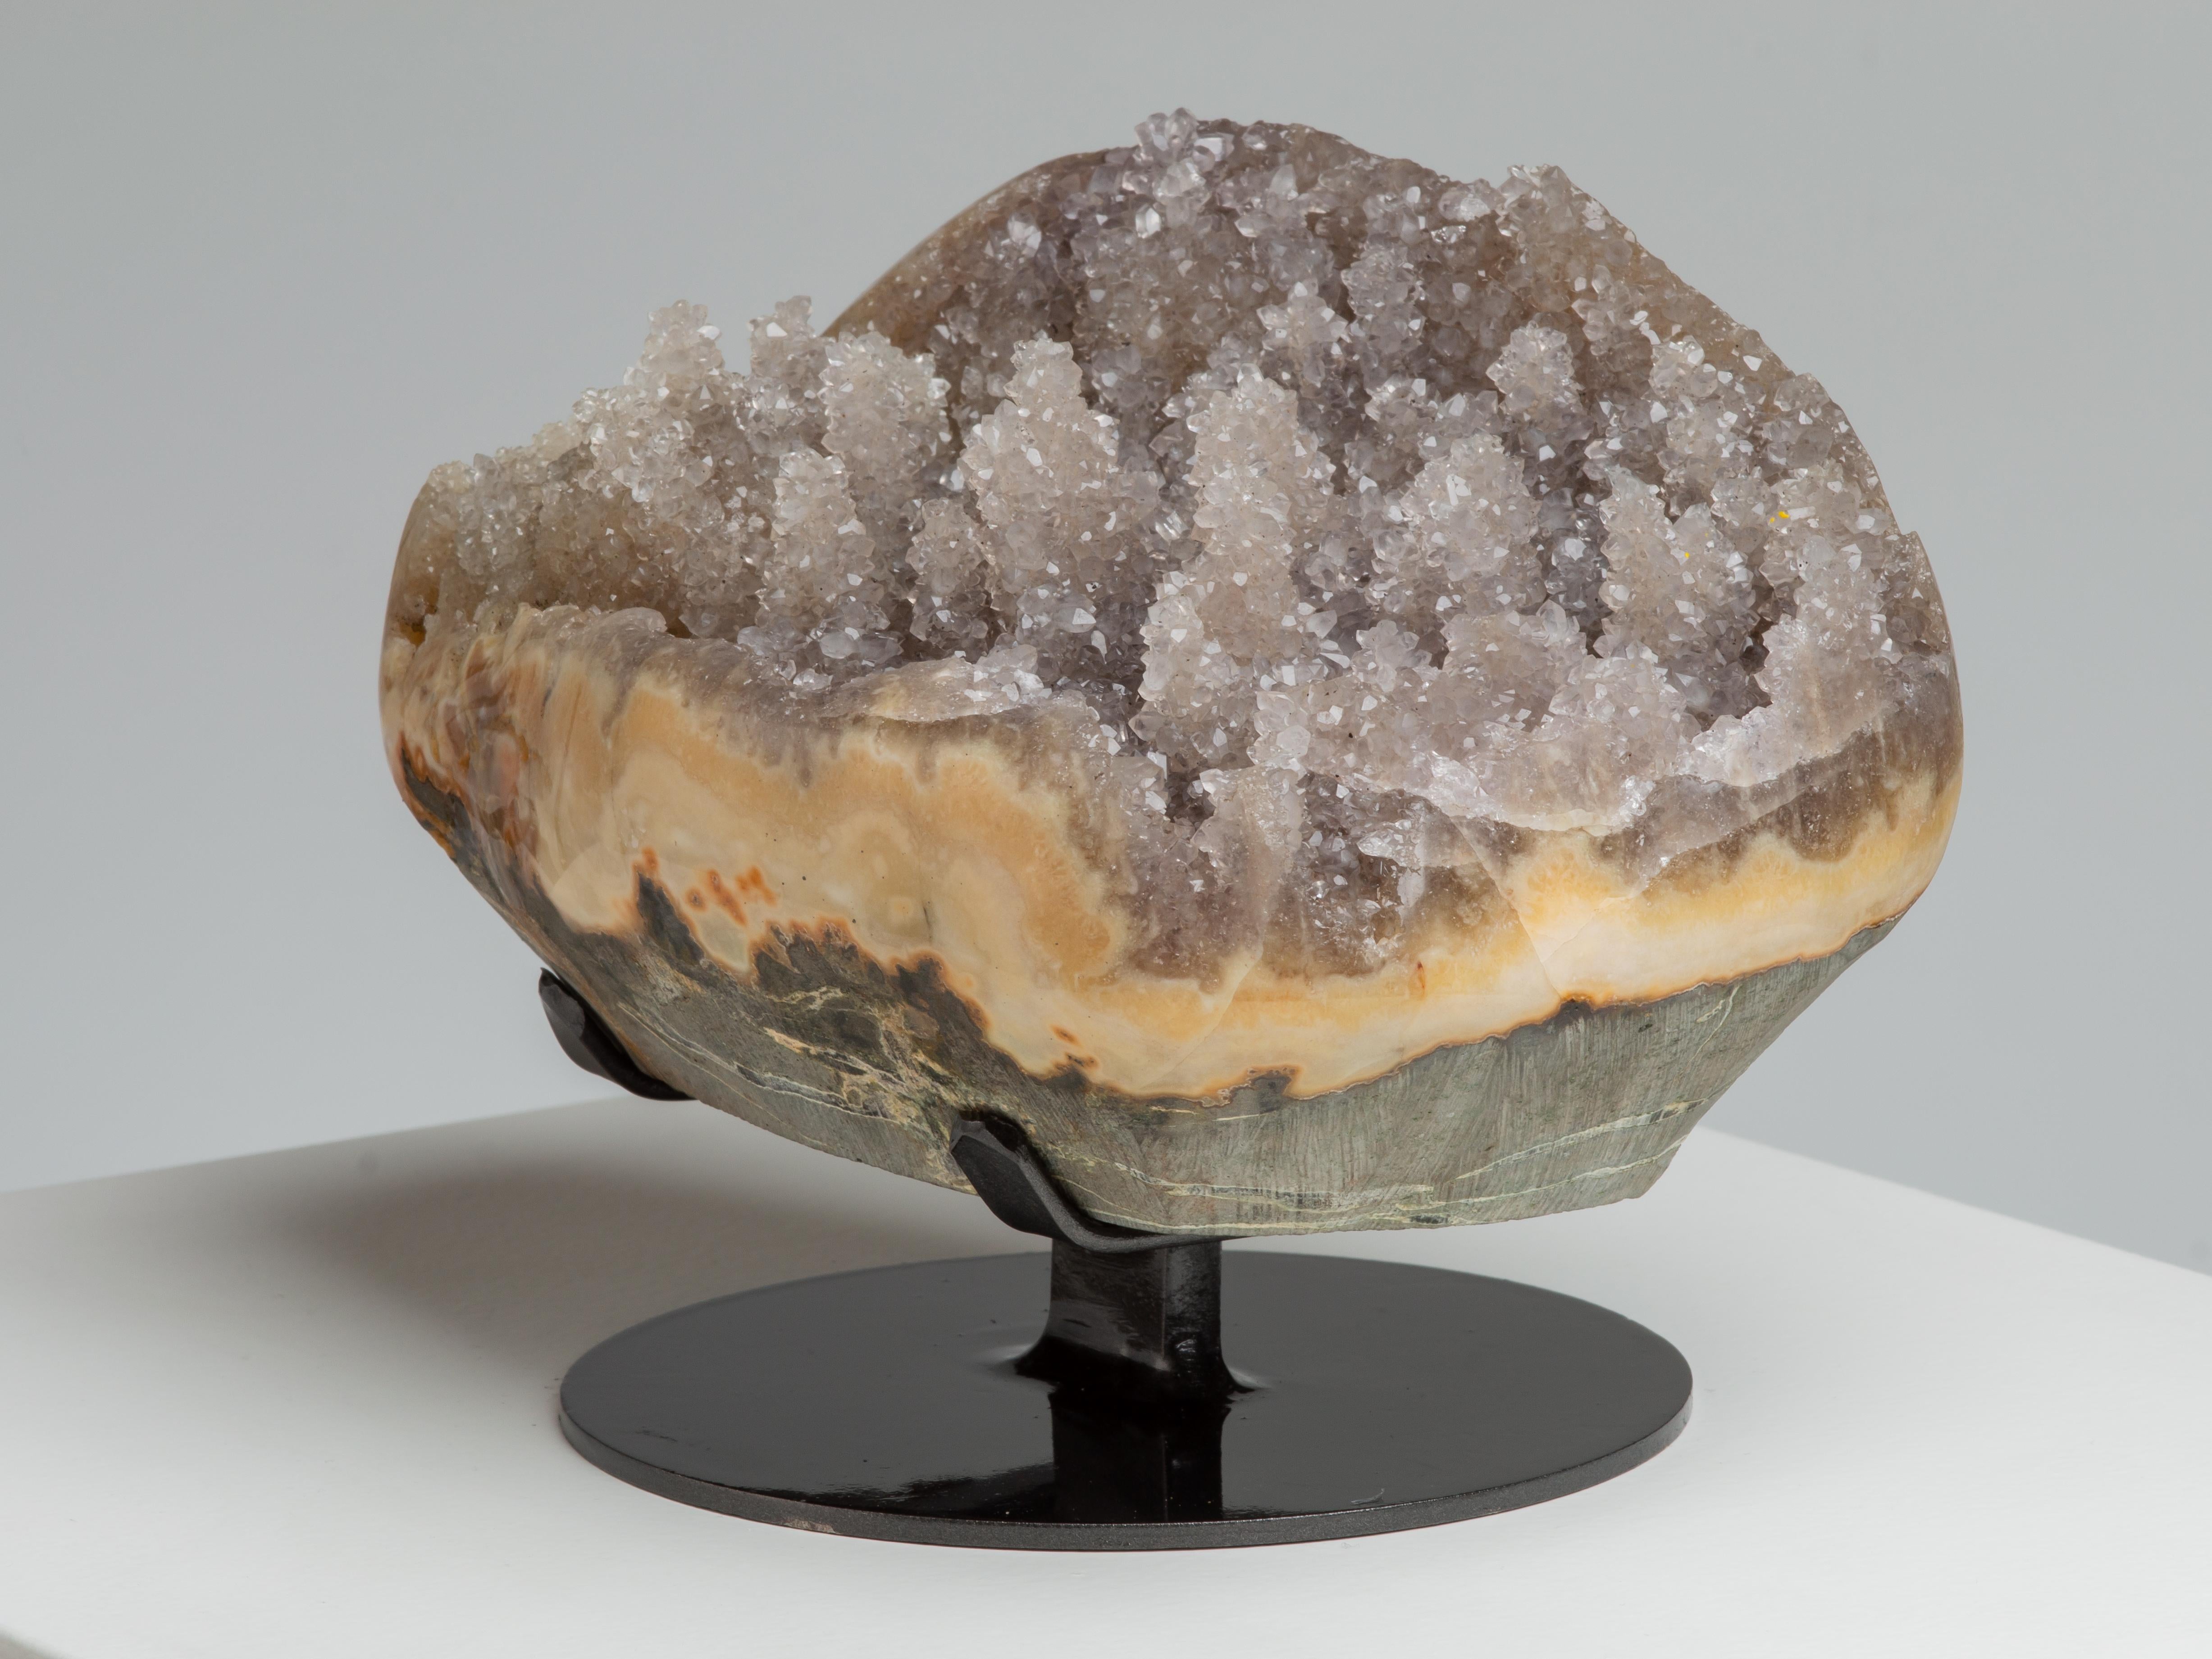 18th Century and Earlier Small Formation of Clear Quartz on Thick Agate For Sale